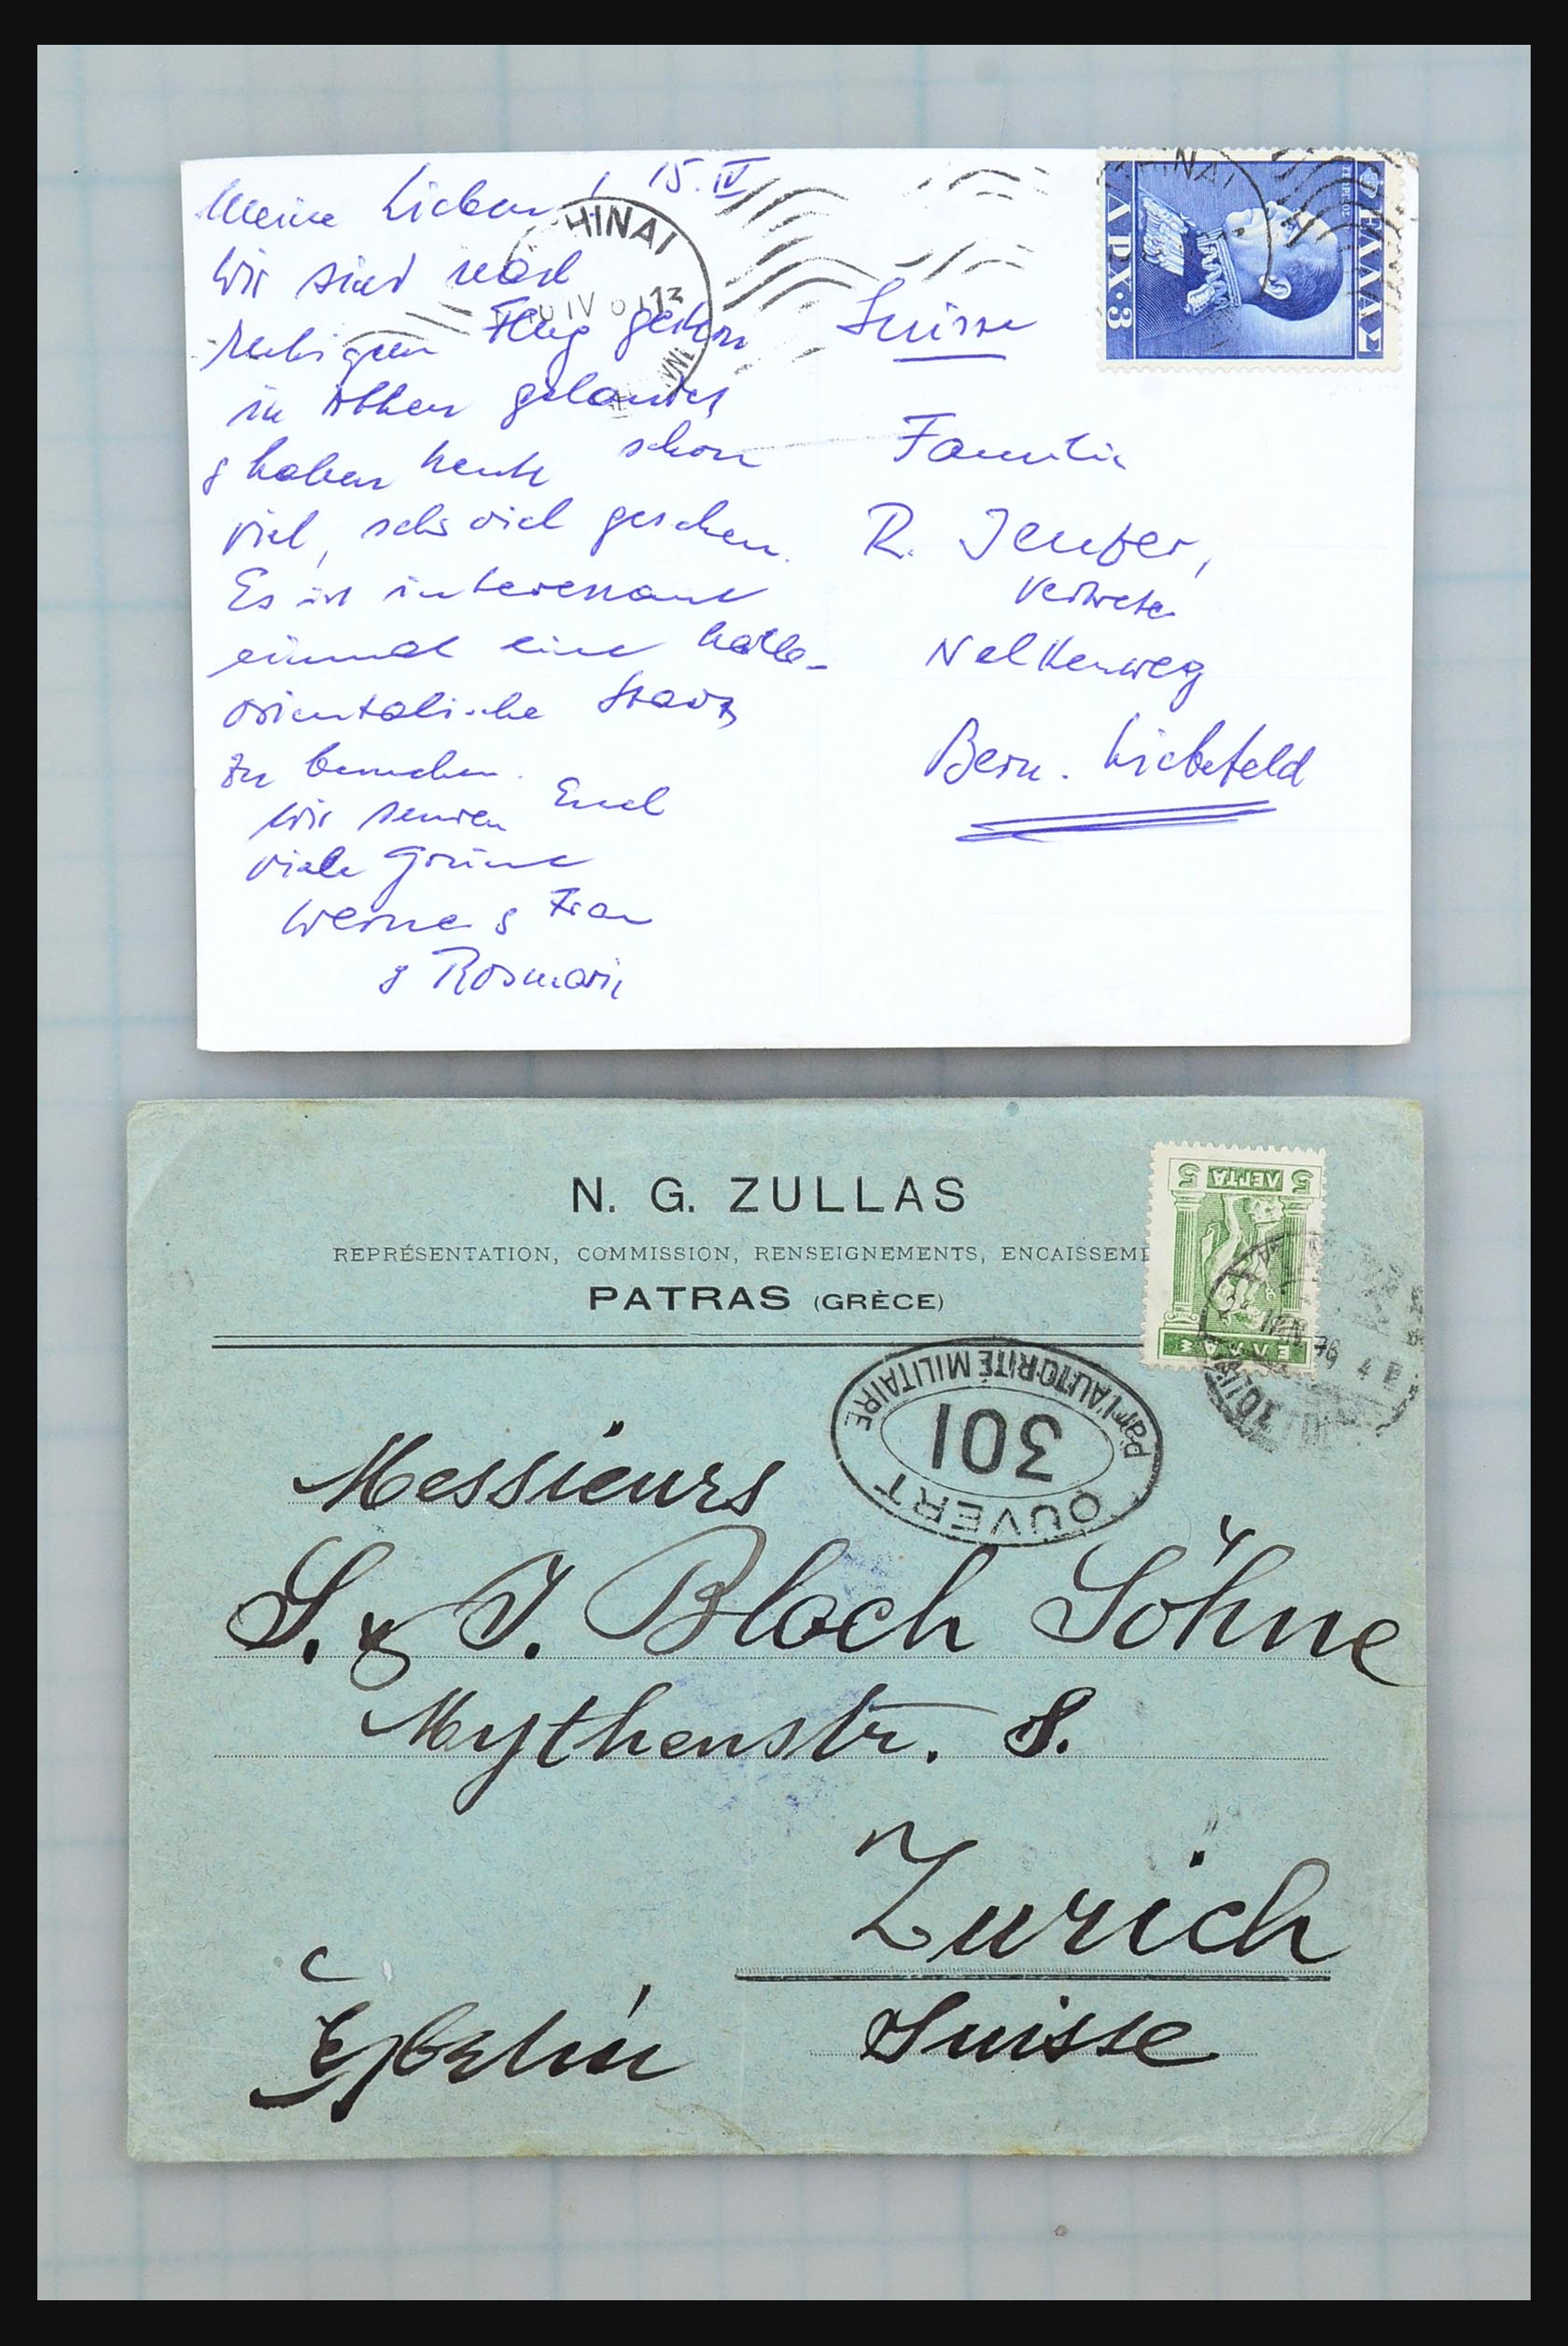 31358 032 - 31358 Portugal/Luxemburg/Greece covers 1880-1960.